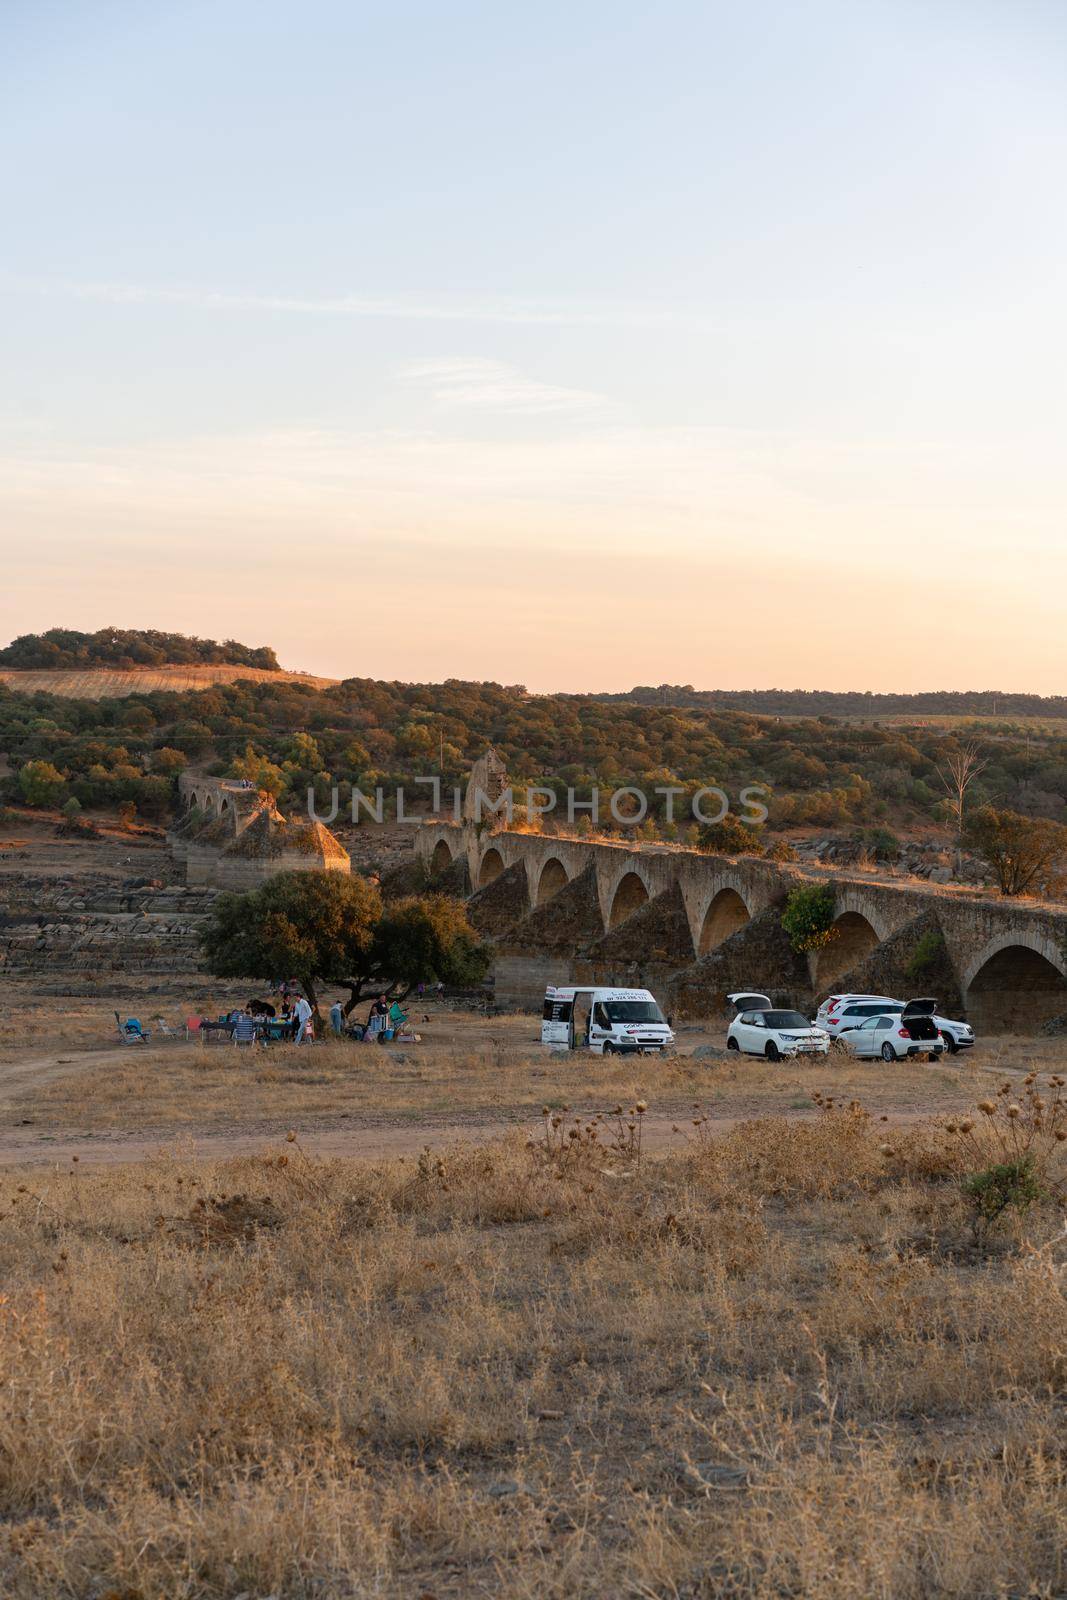 People having a picnic in Alentejo landscape with abandoned destroyed Ajuda bridge on the background at sunset, in Portugal by Luispinaphotography